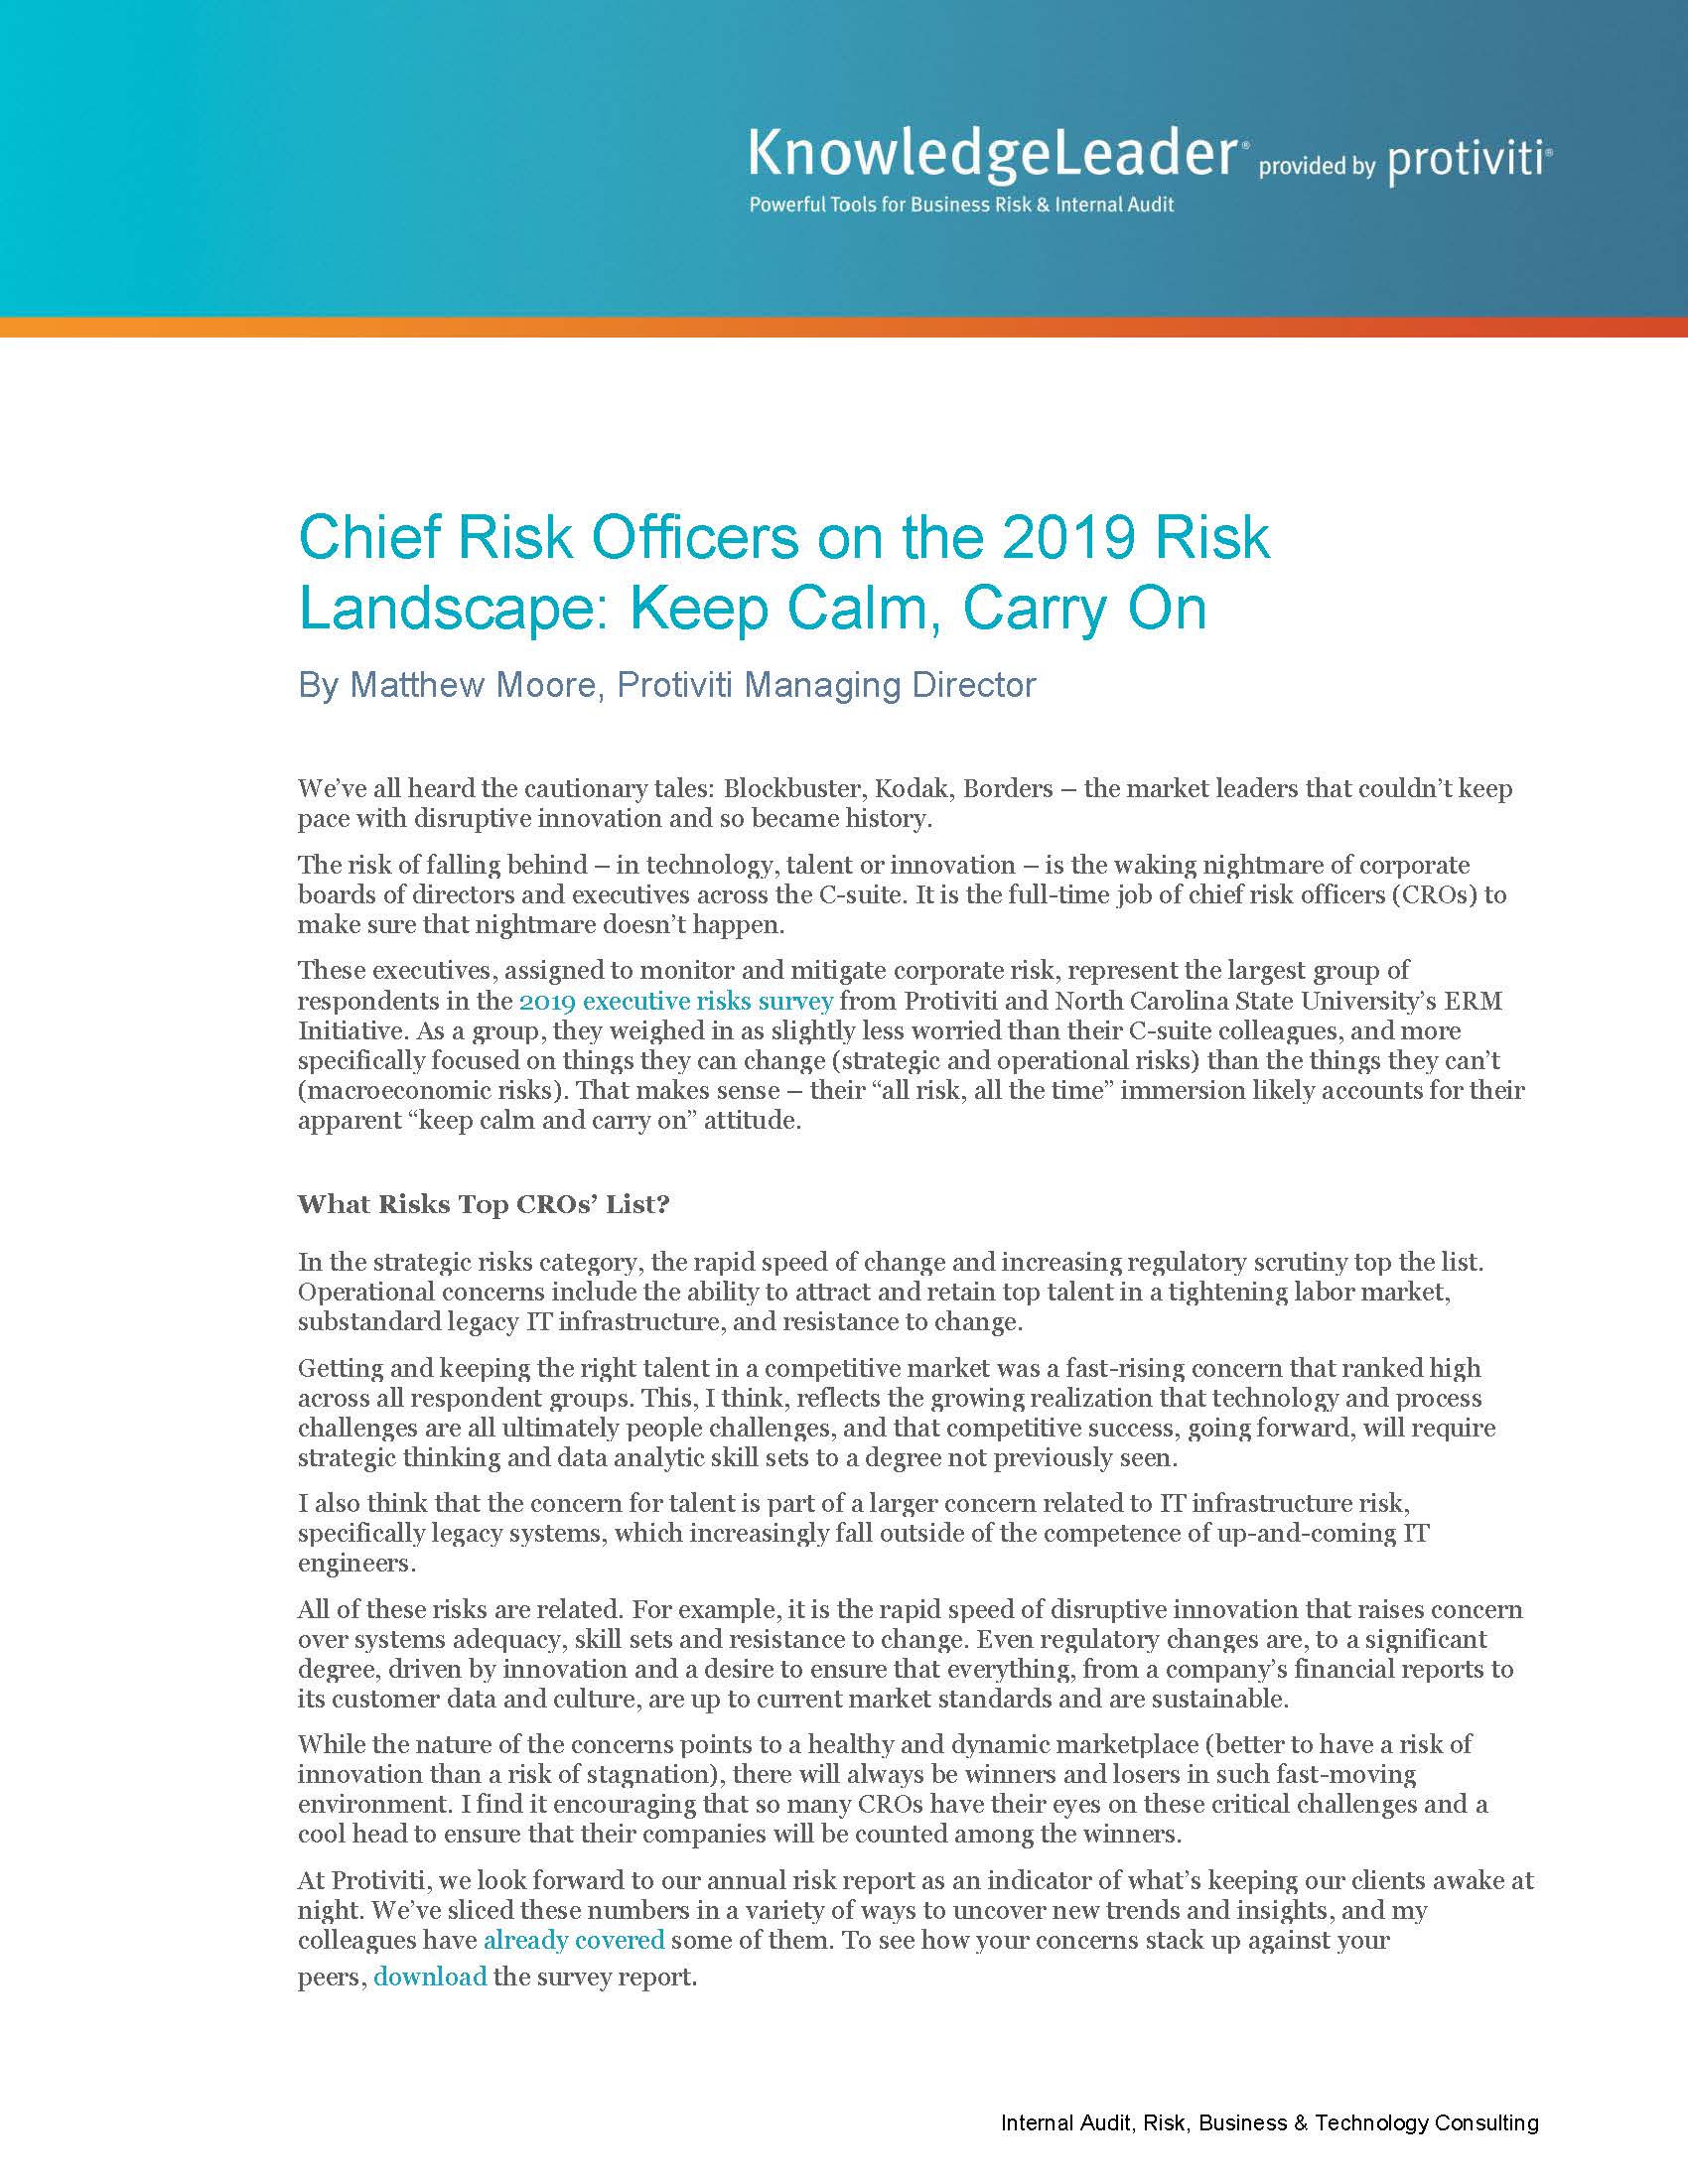 Screenshot of the first page of Chief Risk Officers on the 2019 Risk Landscape: Keep Calm, Carry On